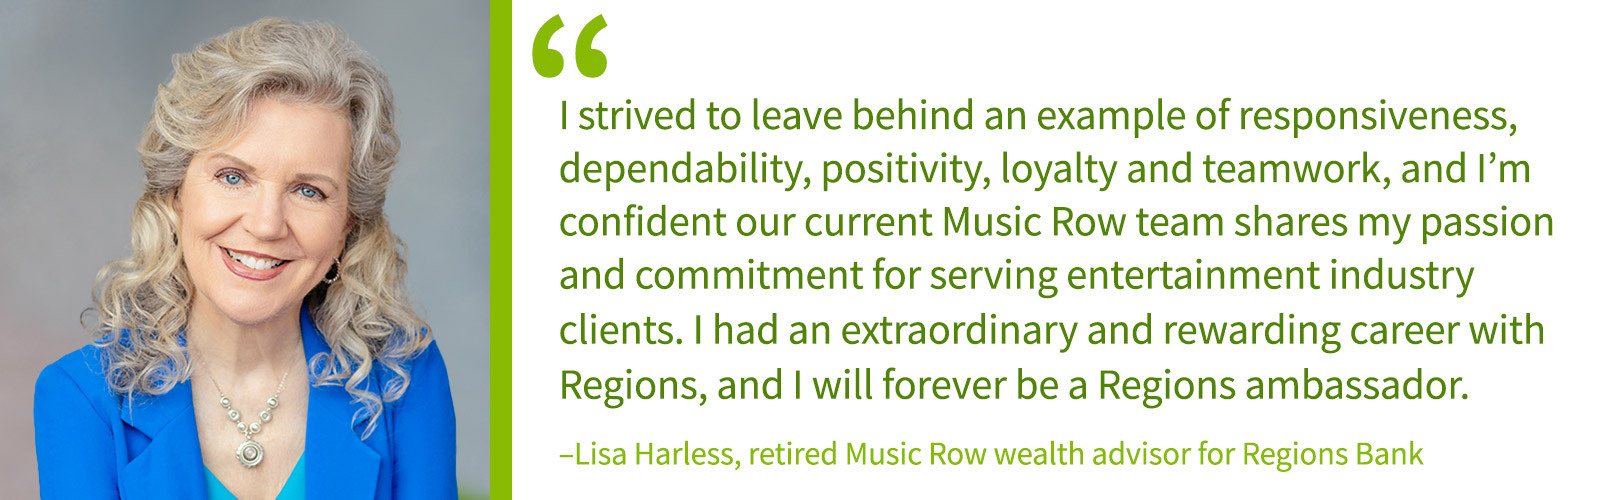 I strived to leave behind an example of responsiveness, dependability, positivity, loyalty and teamwork, and I’m confident our current Music Row team shares my passion and commitment for serving entertainment industry clients. I had an extraordinary and rewarding career with Regions, and I will forever be a Regions ambassador. –Lisa Harless, retired Music Row wealth advisor for Regions Bank